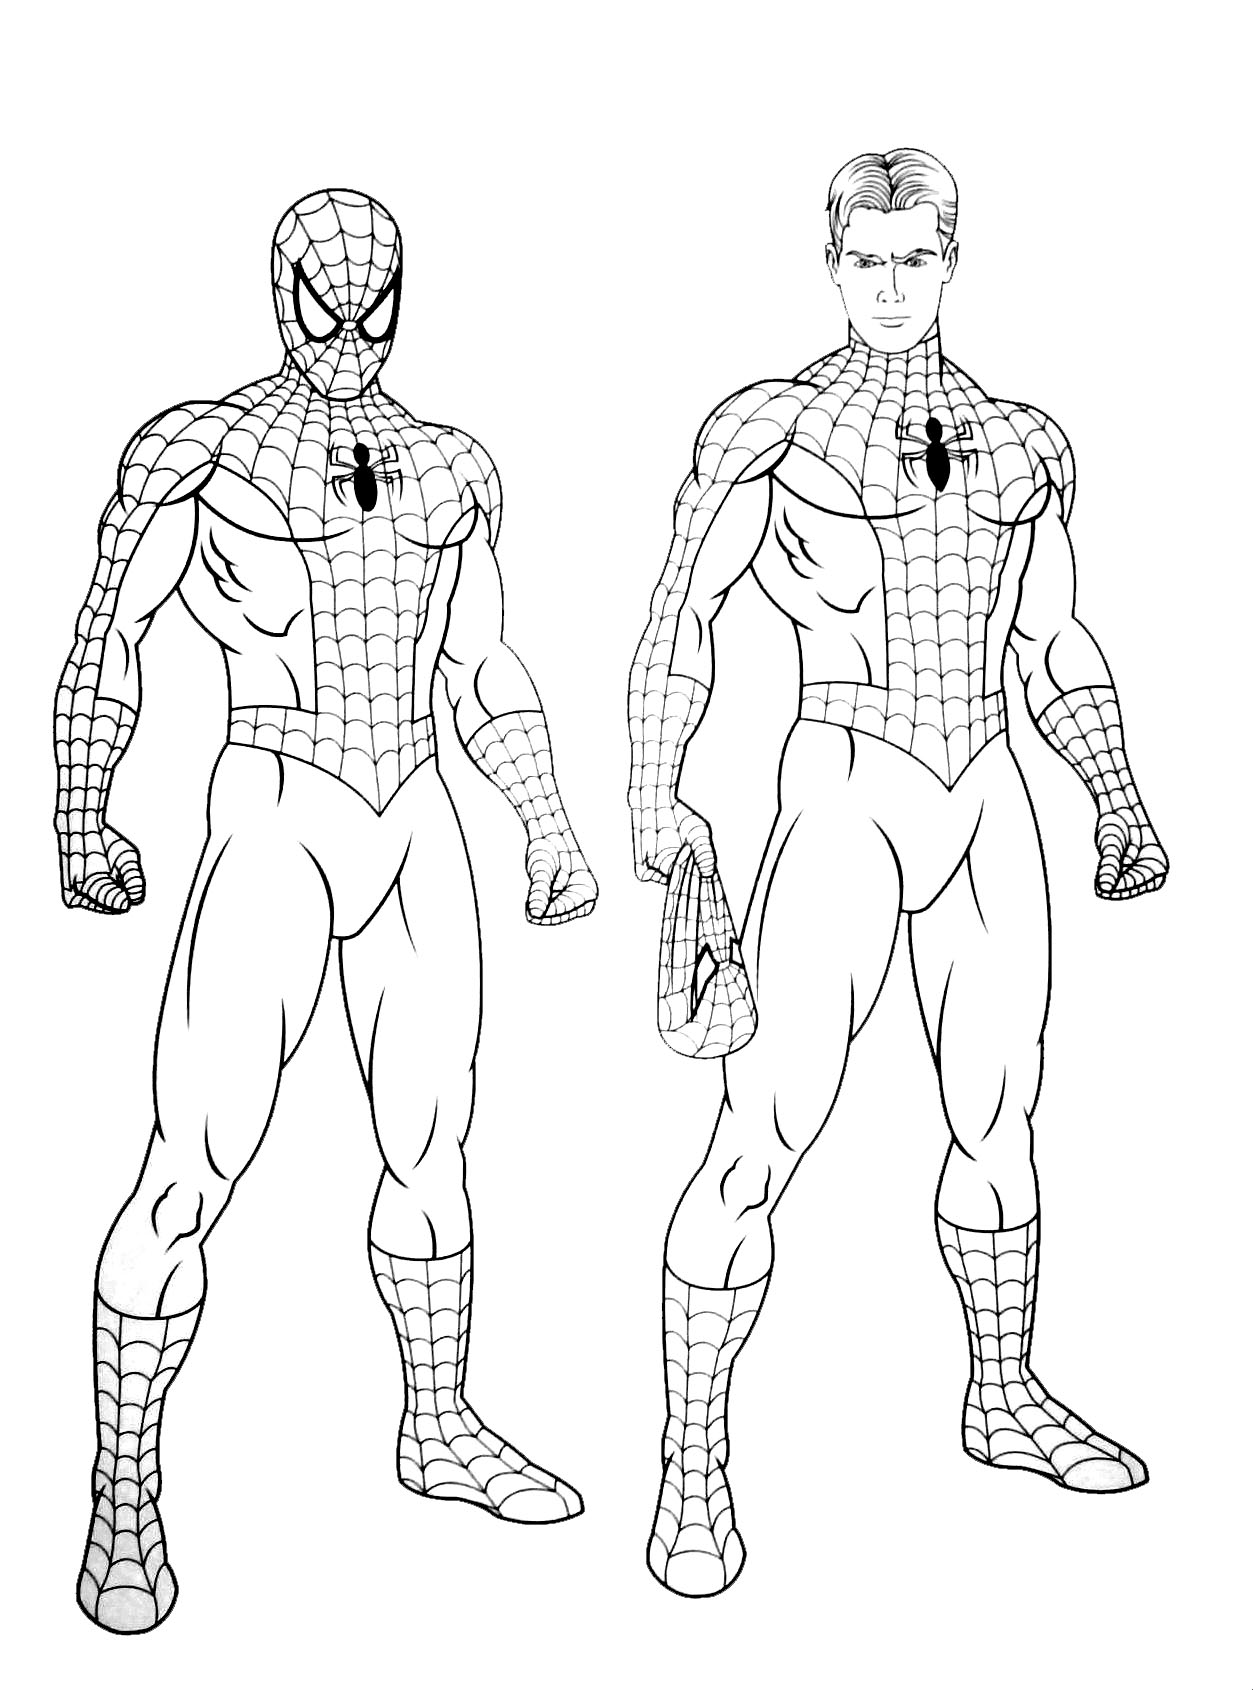 Spiderman free to color for kids   Spiderman Kids Coloring Pages